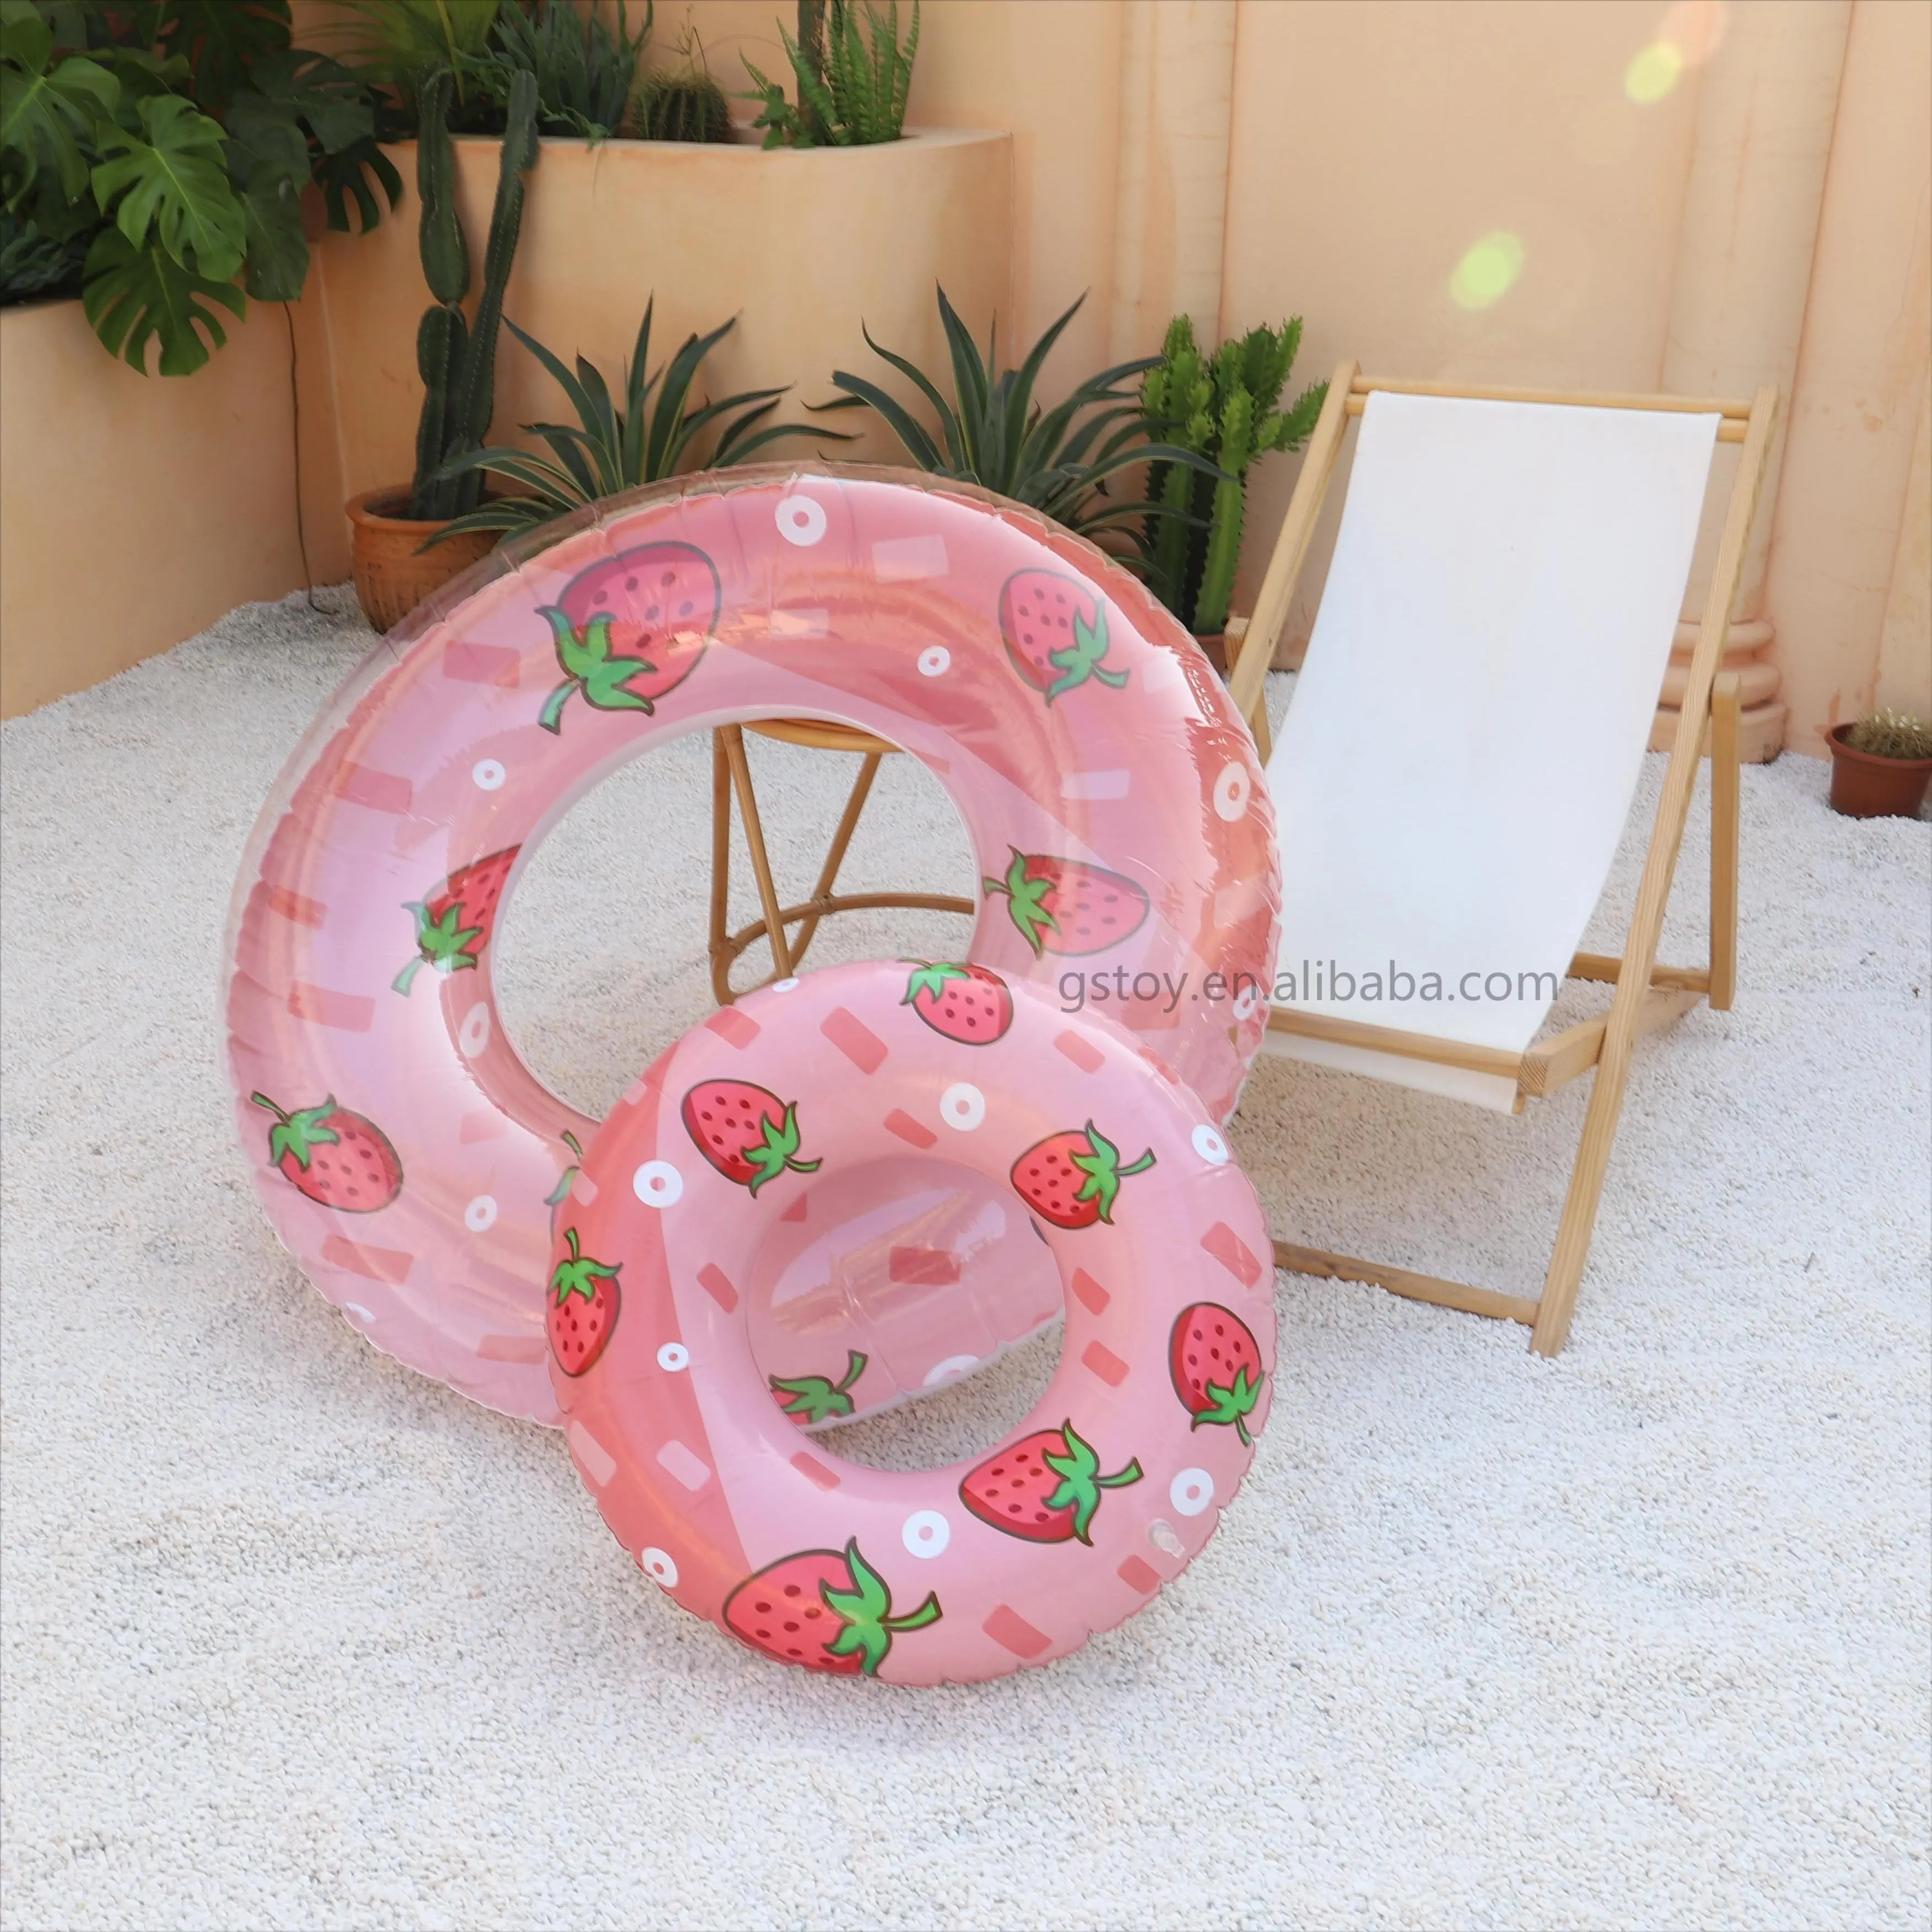 Summer Pool Inflatable Strawberry Shape Swimming Rings For Adult